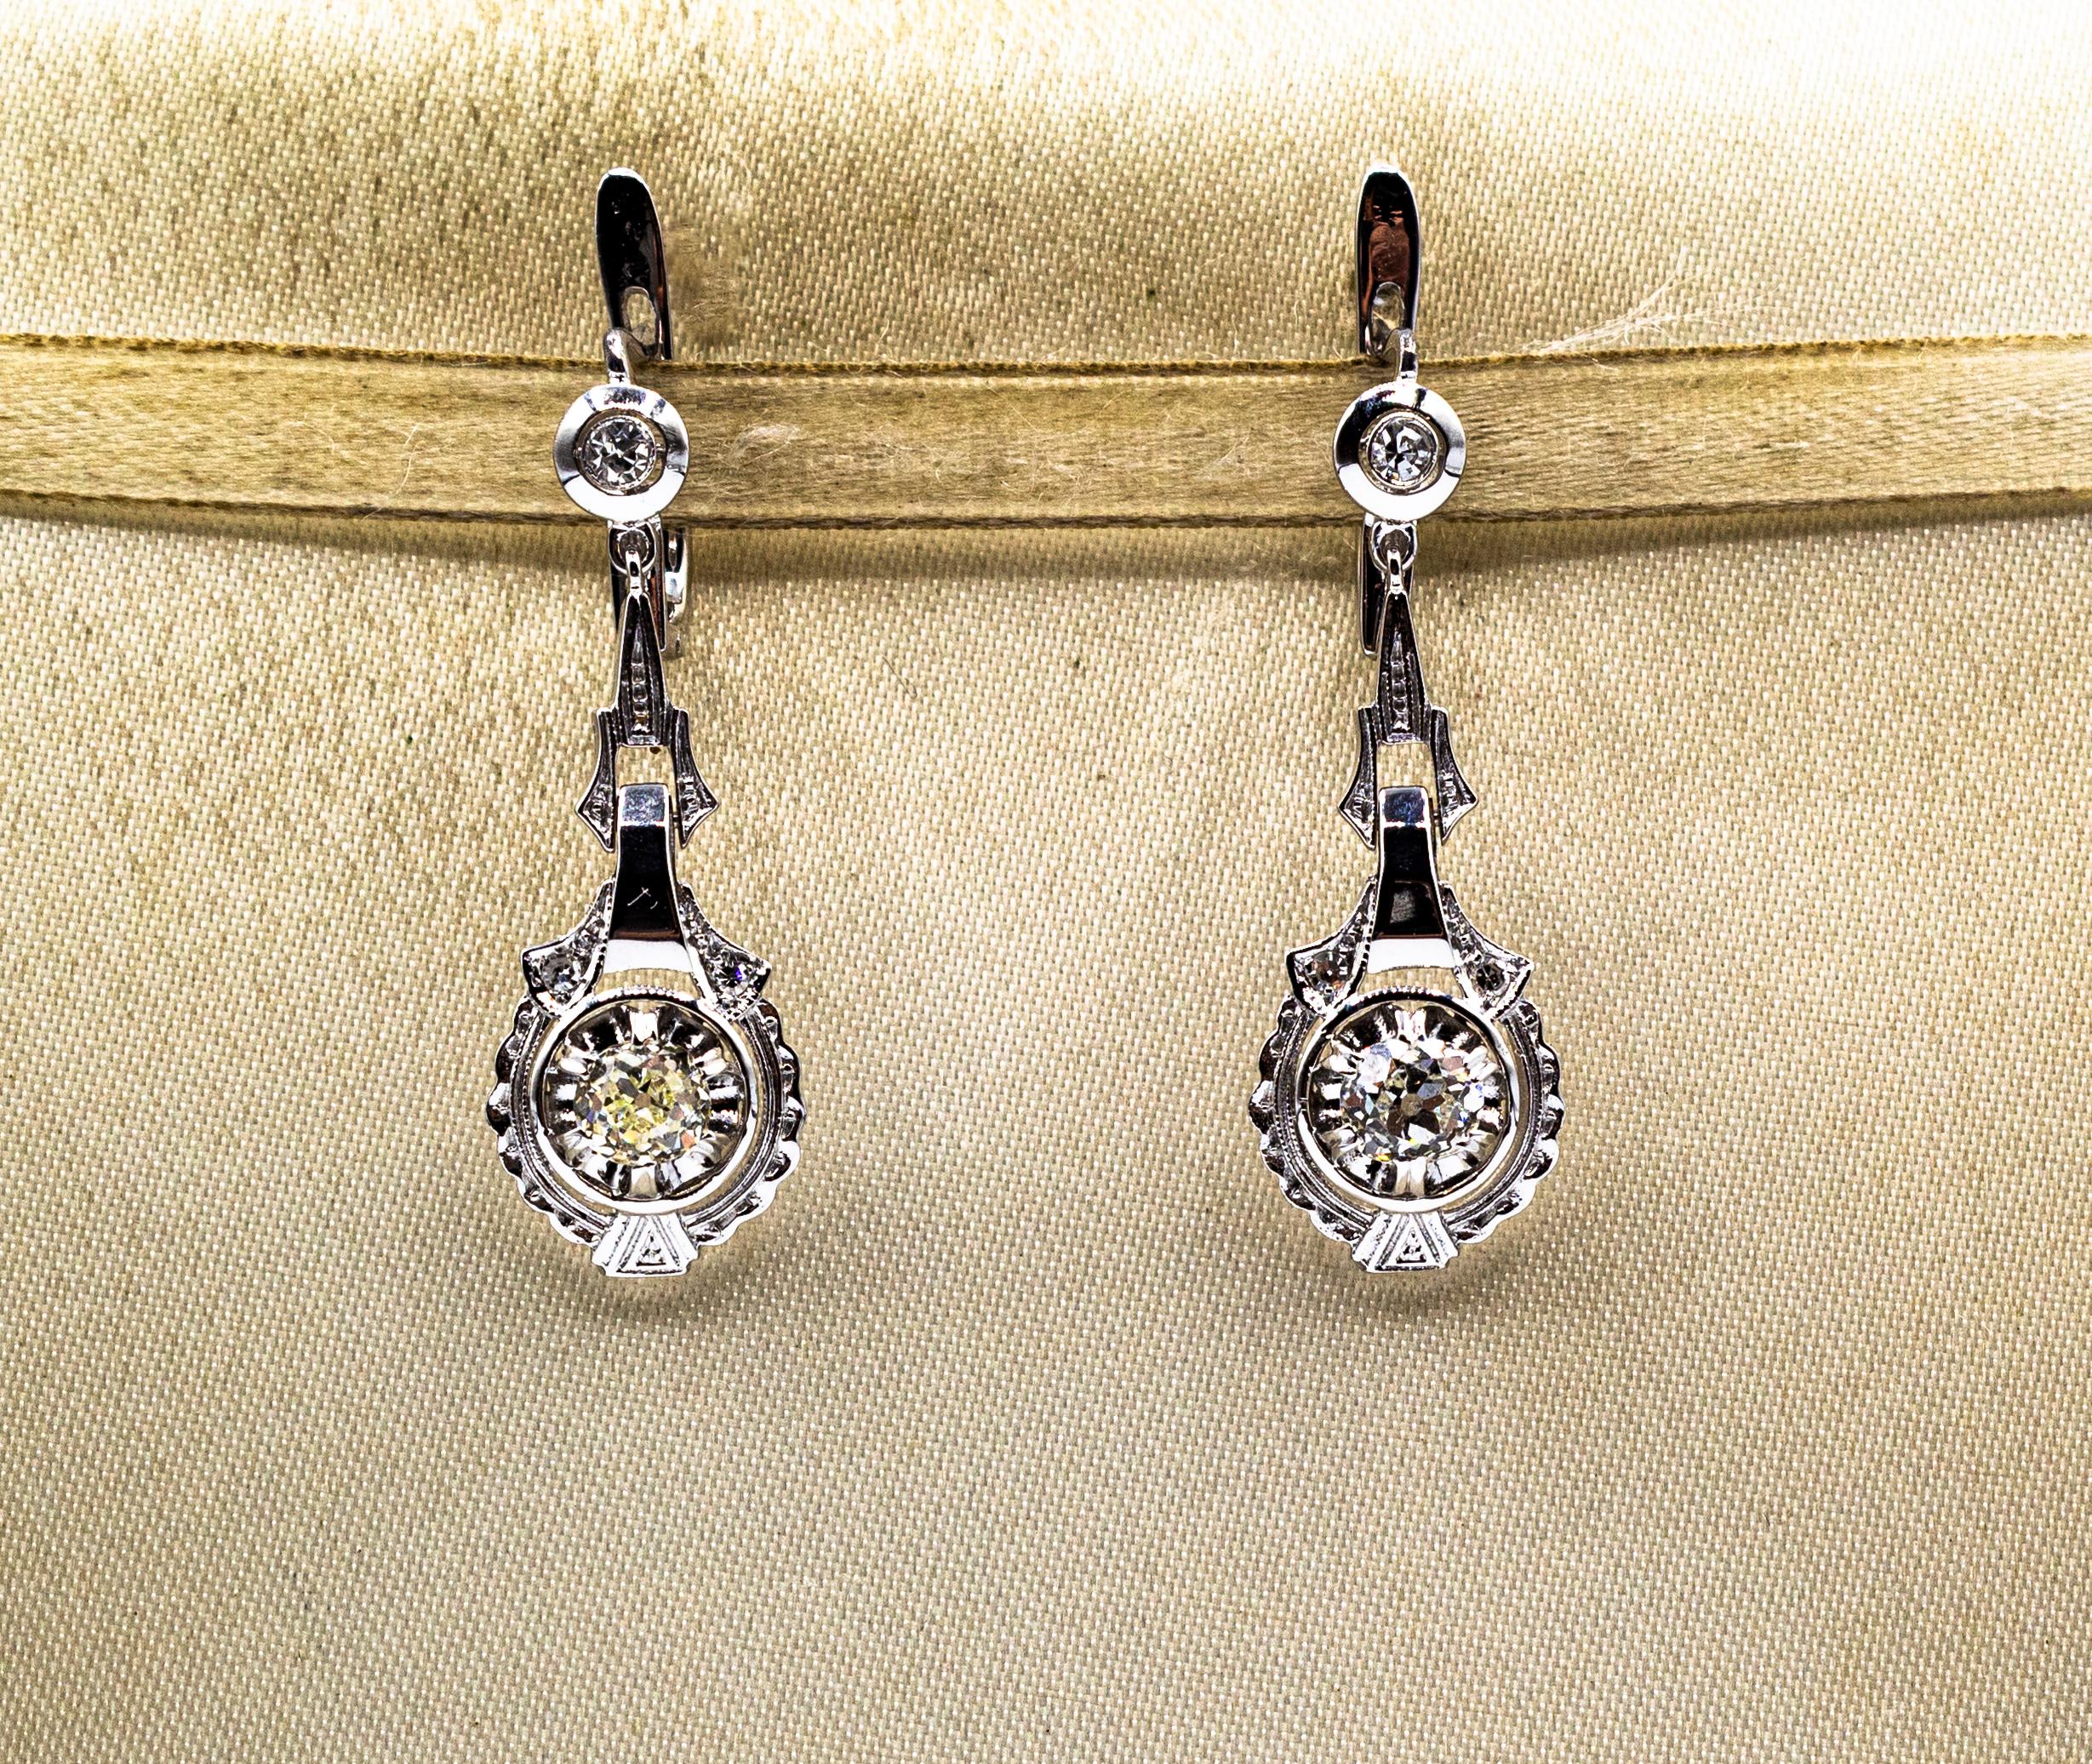 These Earrings are made of 18K White Gold.
These Earrings have 1.15 Carats of White European Old Cut Diamonds.
These Earrings have 0.15 Carats of White Brilliant Cut Diamonds.

All our Earrings have pins for pierced ears but we can change the